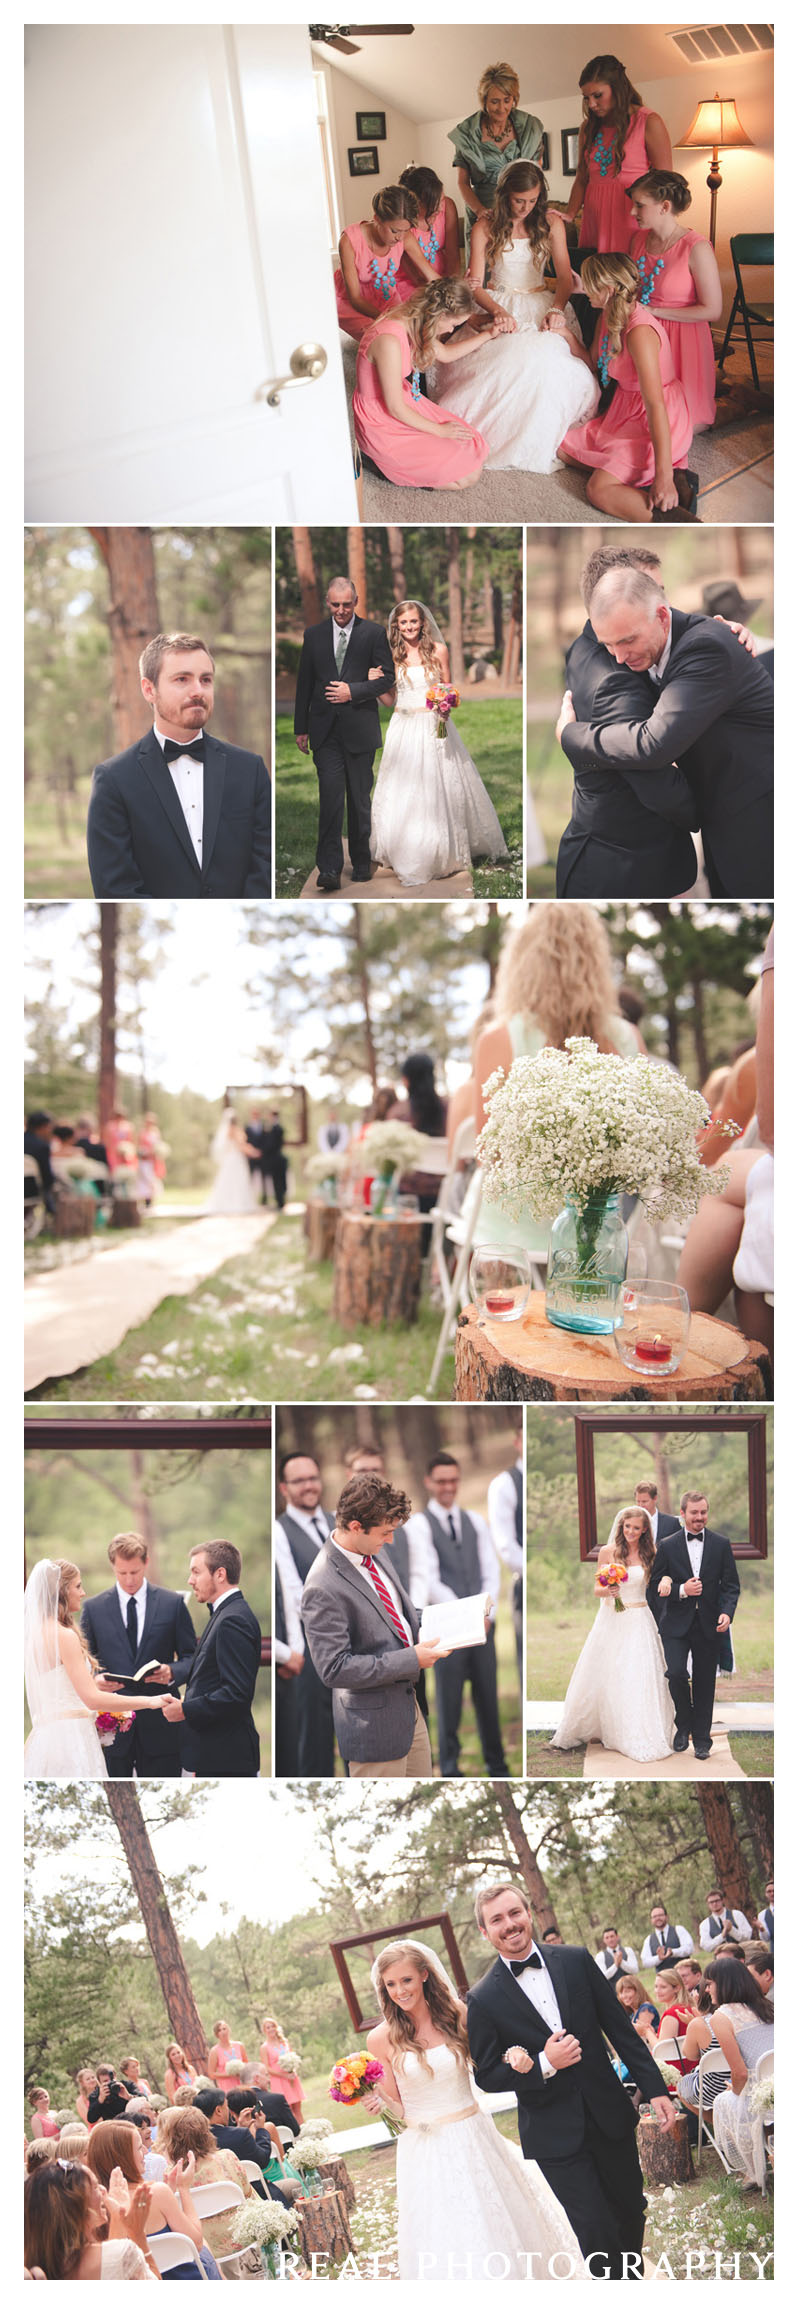 wedding photographer outside home ceremony black forest